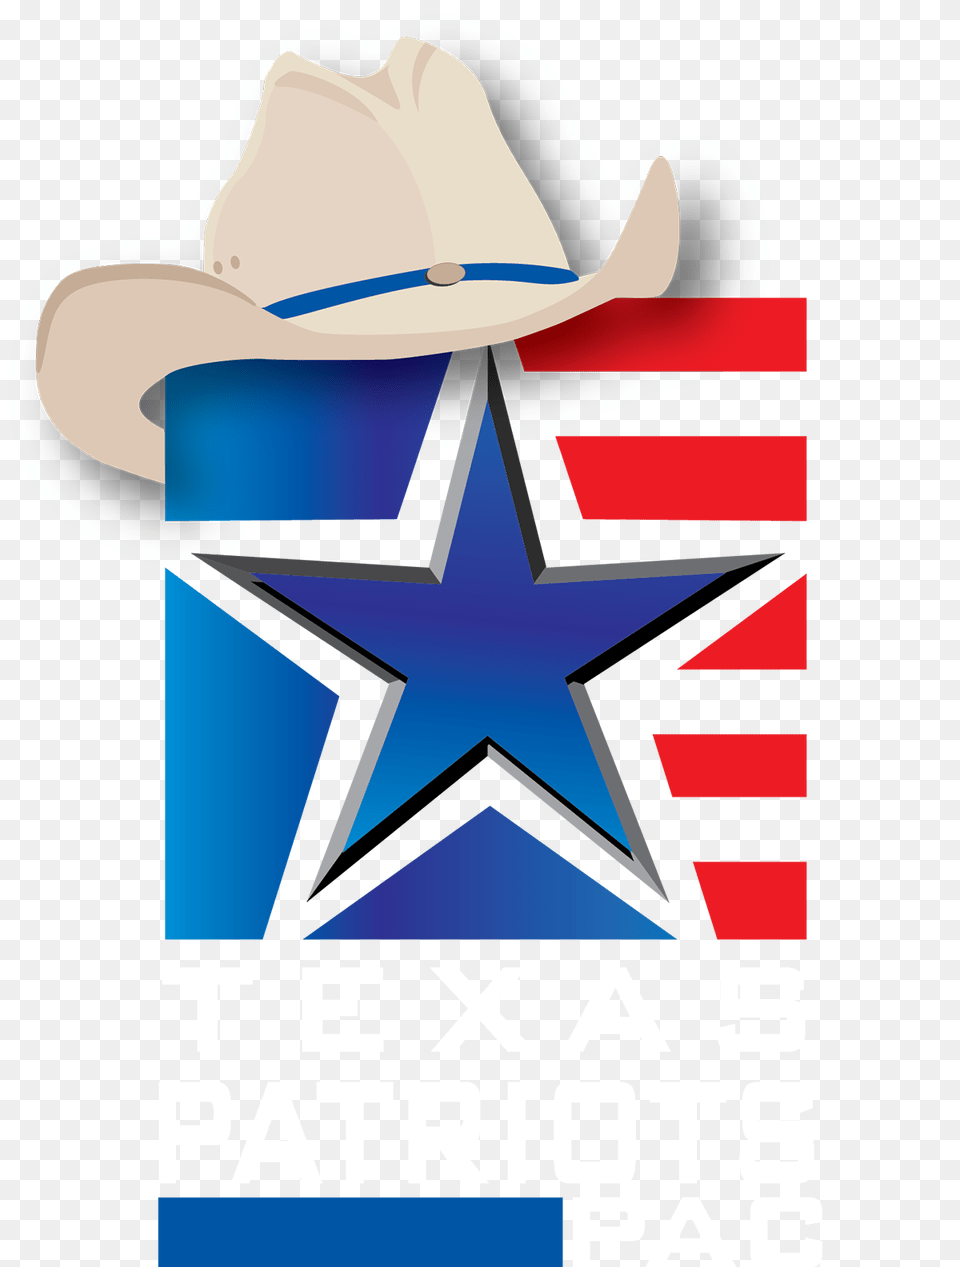 Texas Patriots Pac Presents Death Of A Nation, Clothing, Hat, Cowboy Hat, Symbol Free Png Download